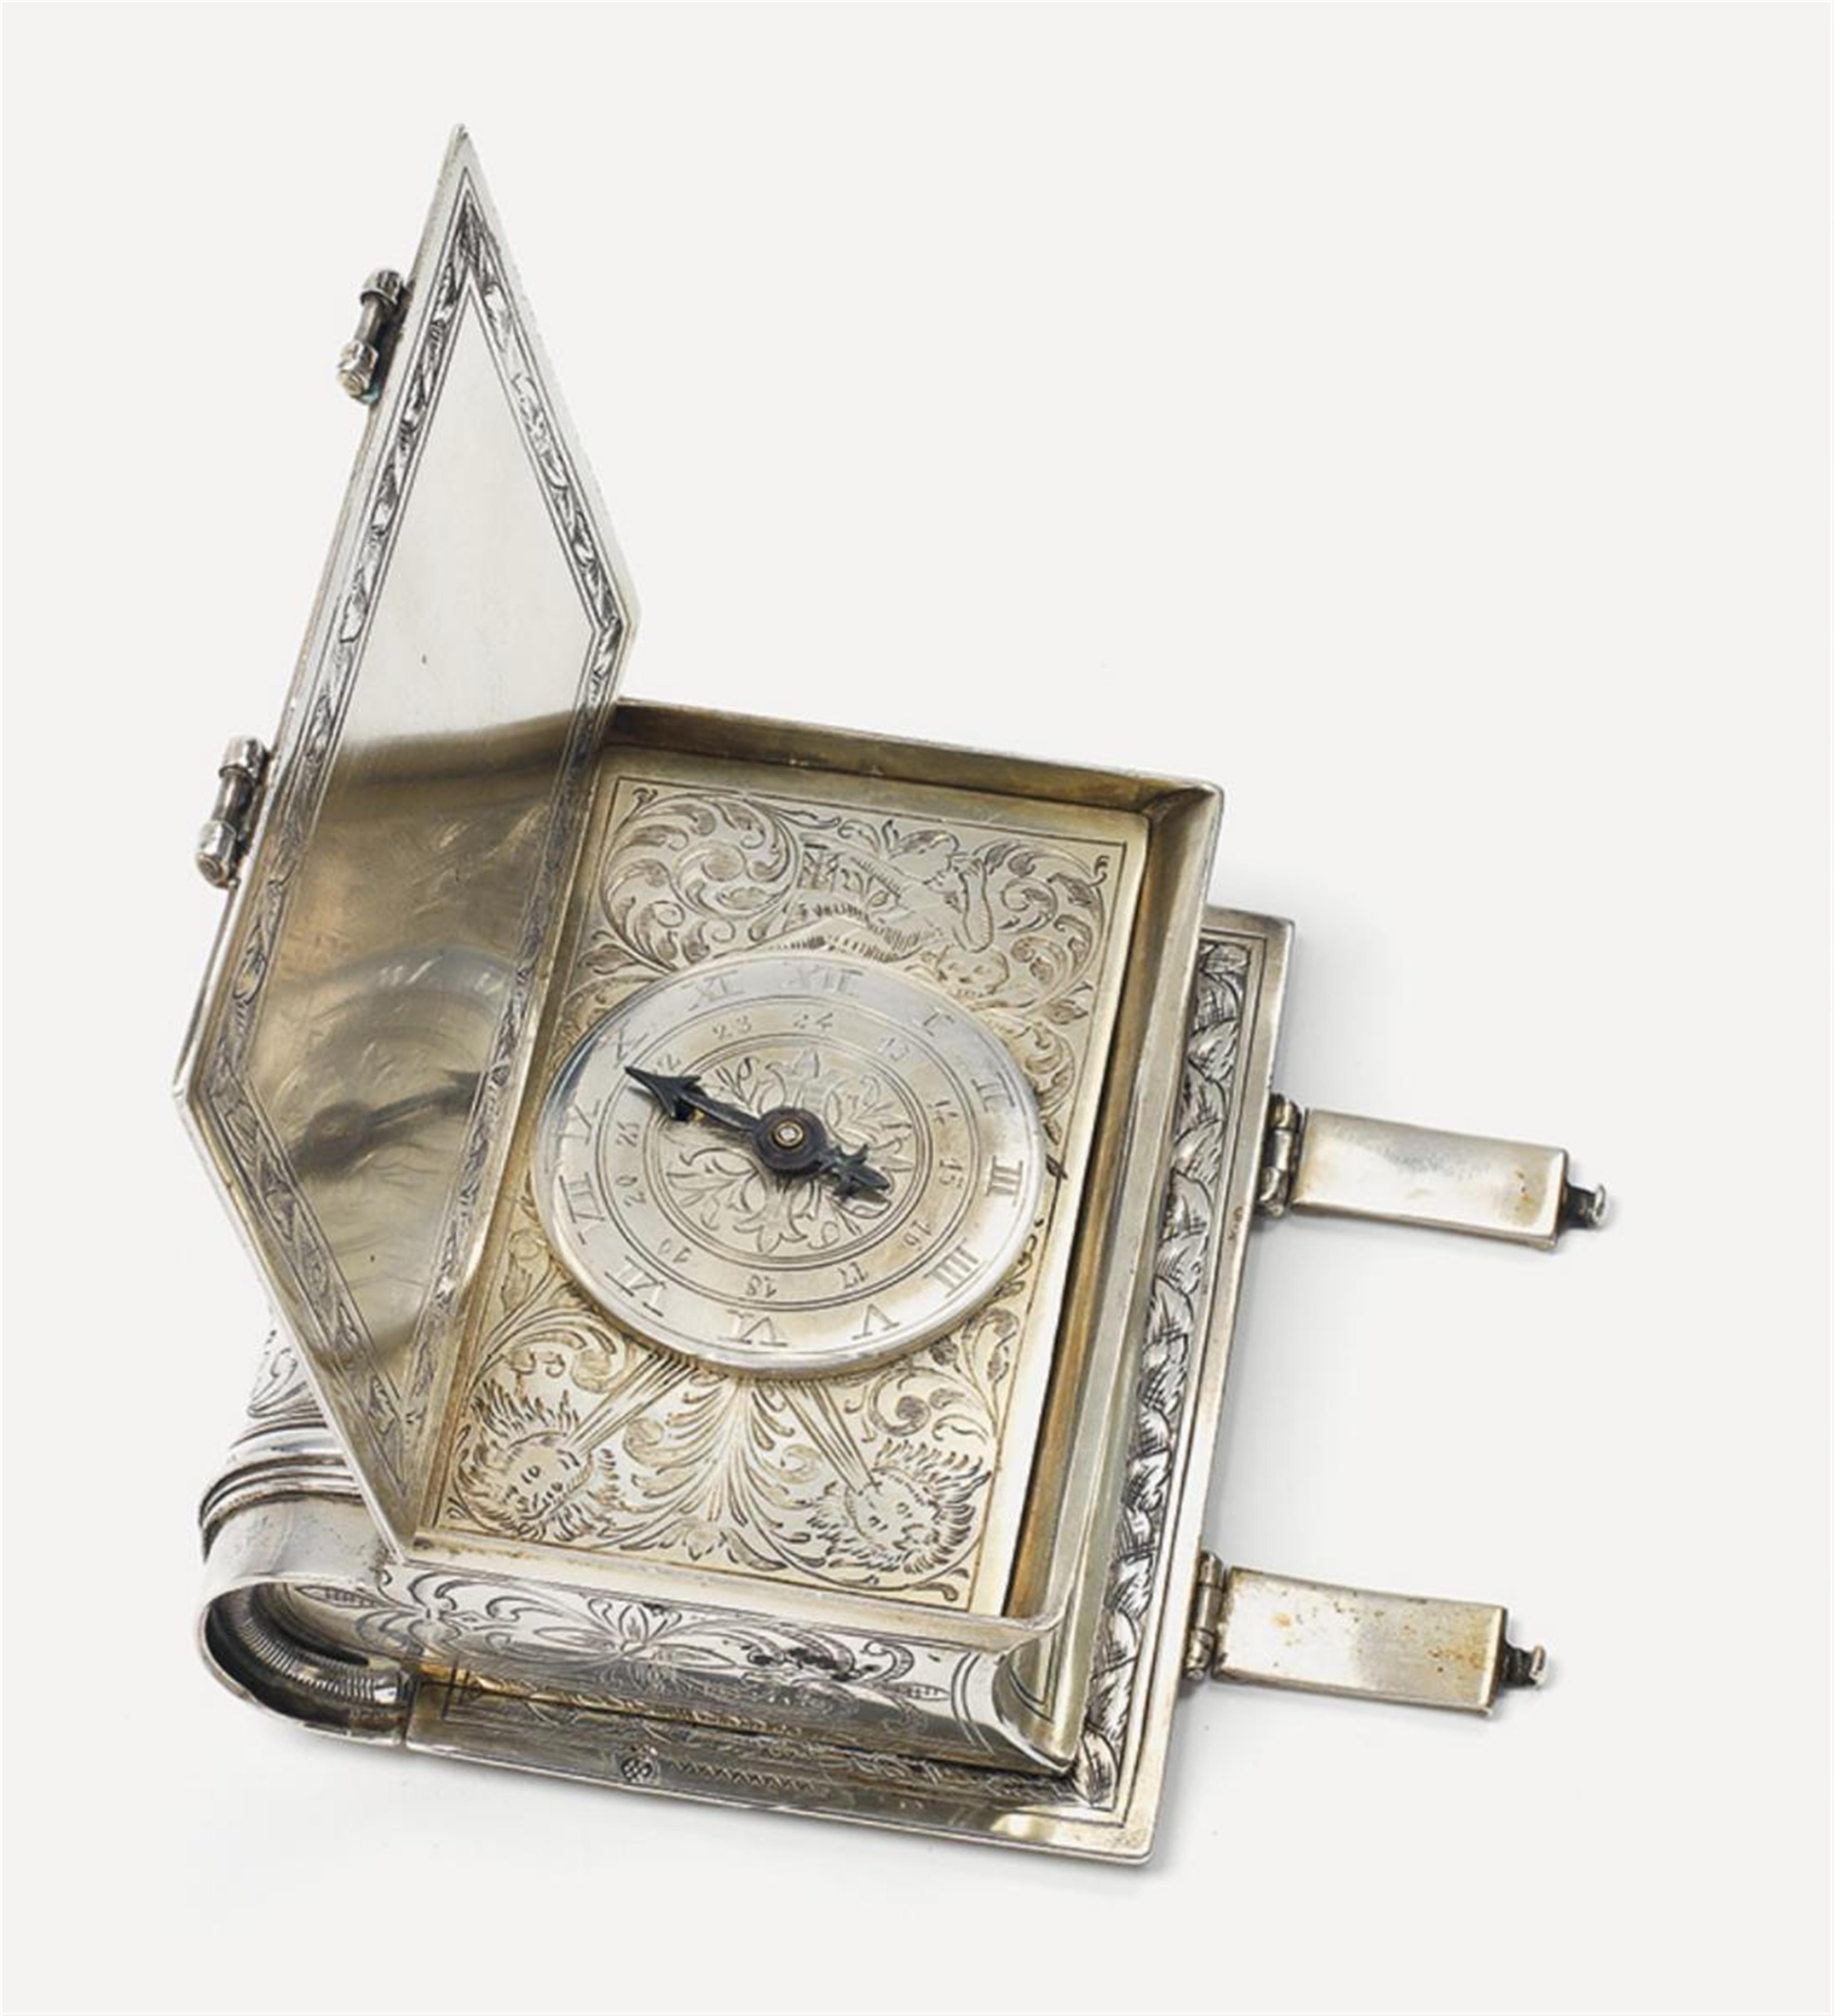 An Augsburg silver carriage clock formed as a book, the unsigned pocketwatch movement French, ca. 1820 - 40. No maker's mark, 1679 - 83. Ri Reiseuhr in Buchform - image-1